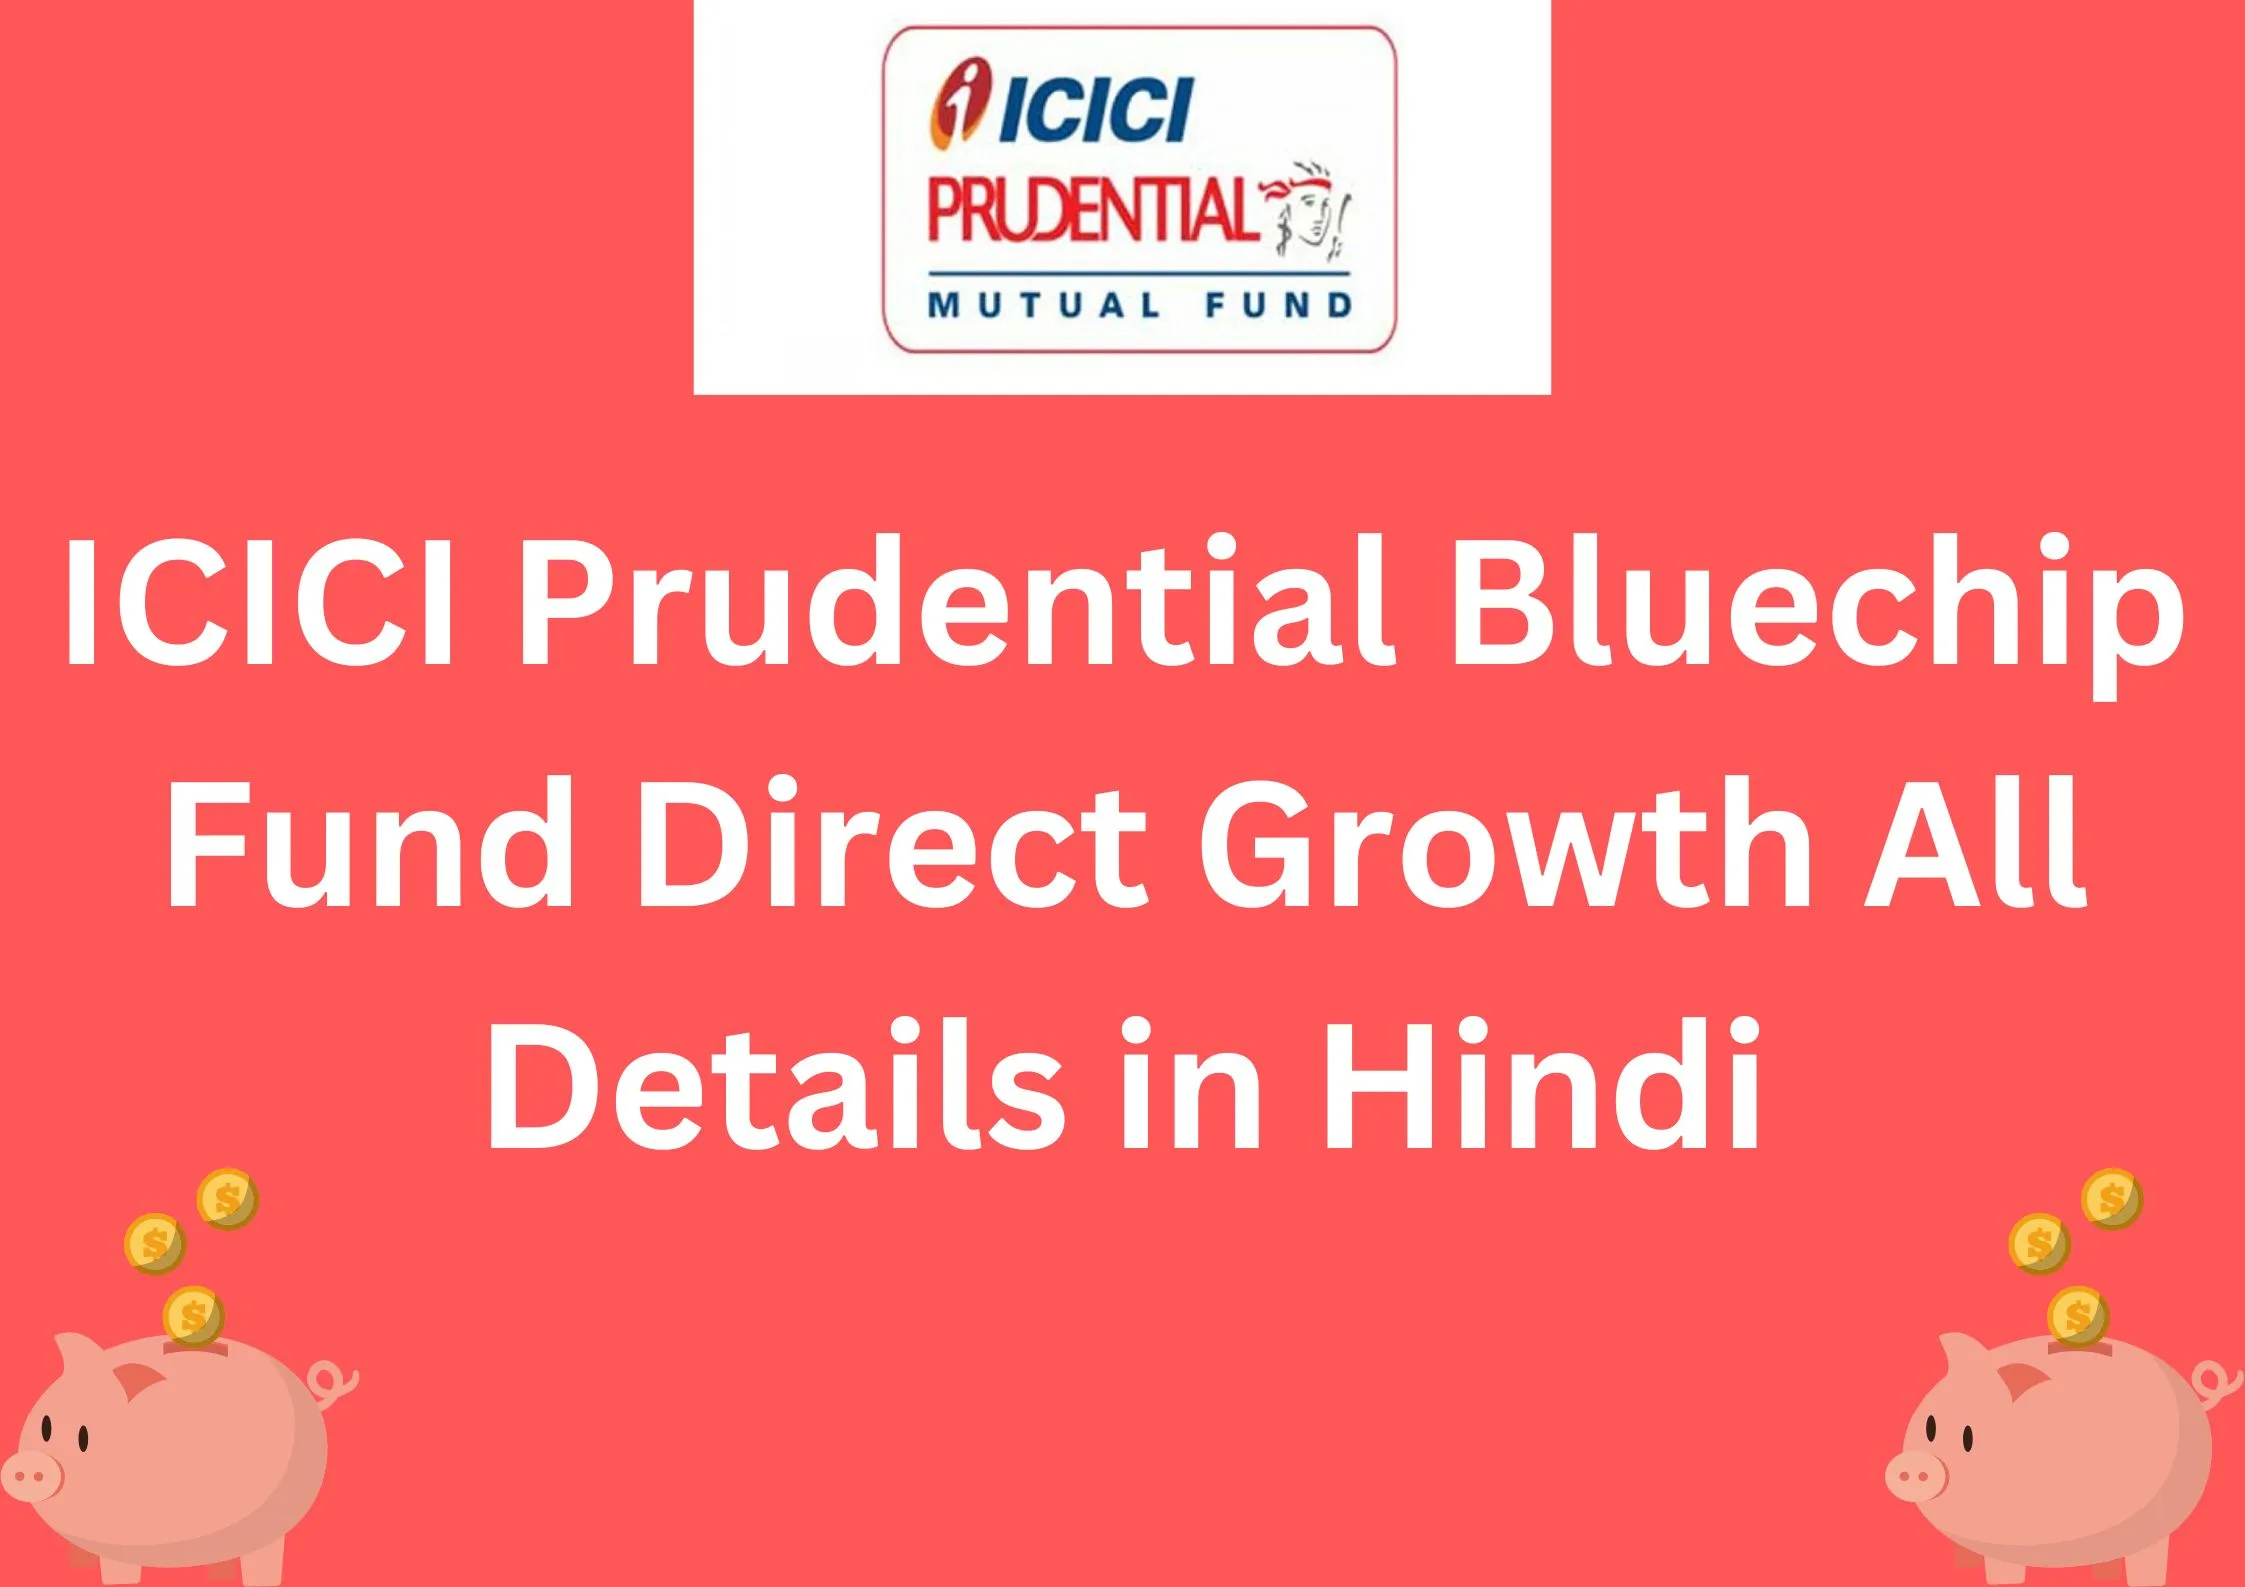 ICICI-Prudential-Bluechip-Fund-Direct-Growth-All-Details-in-Hindi